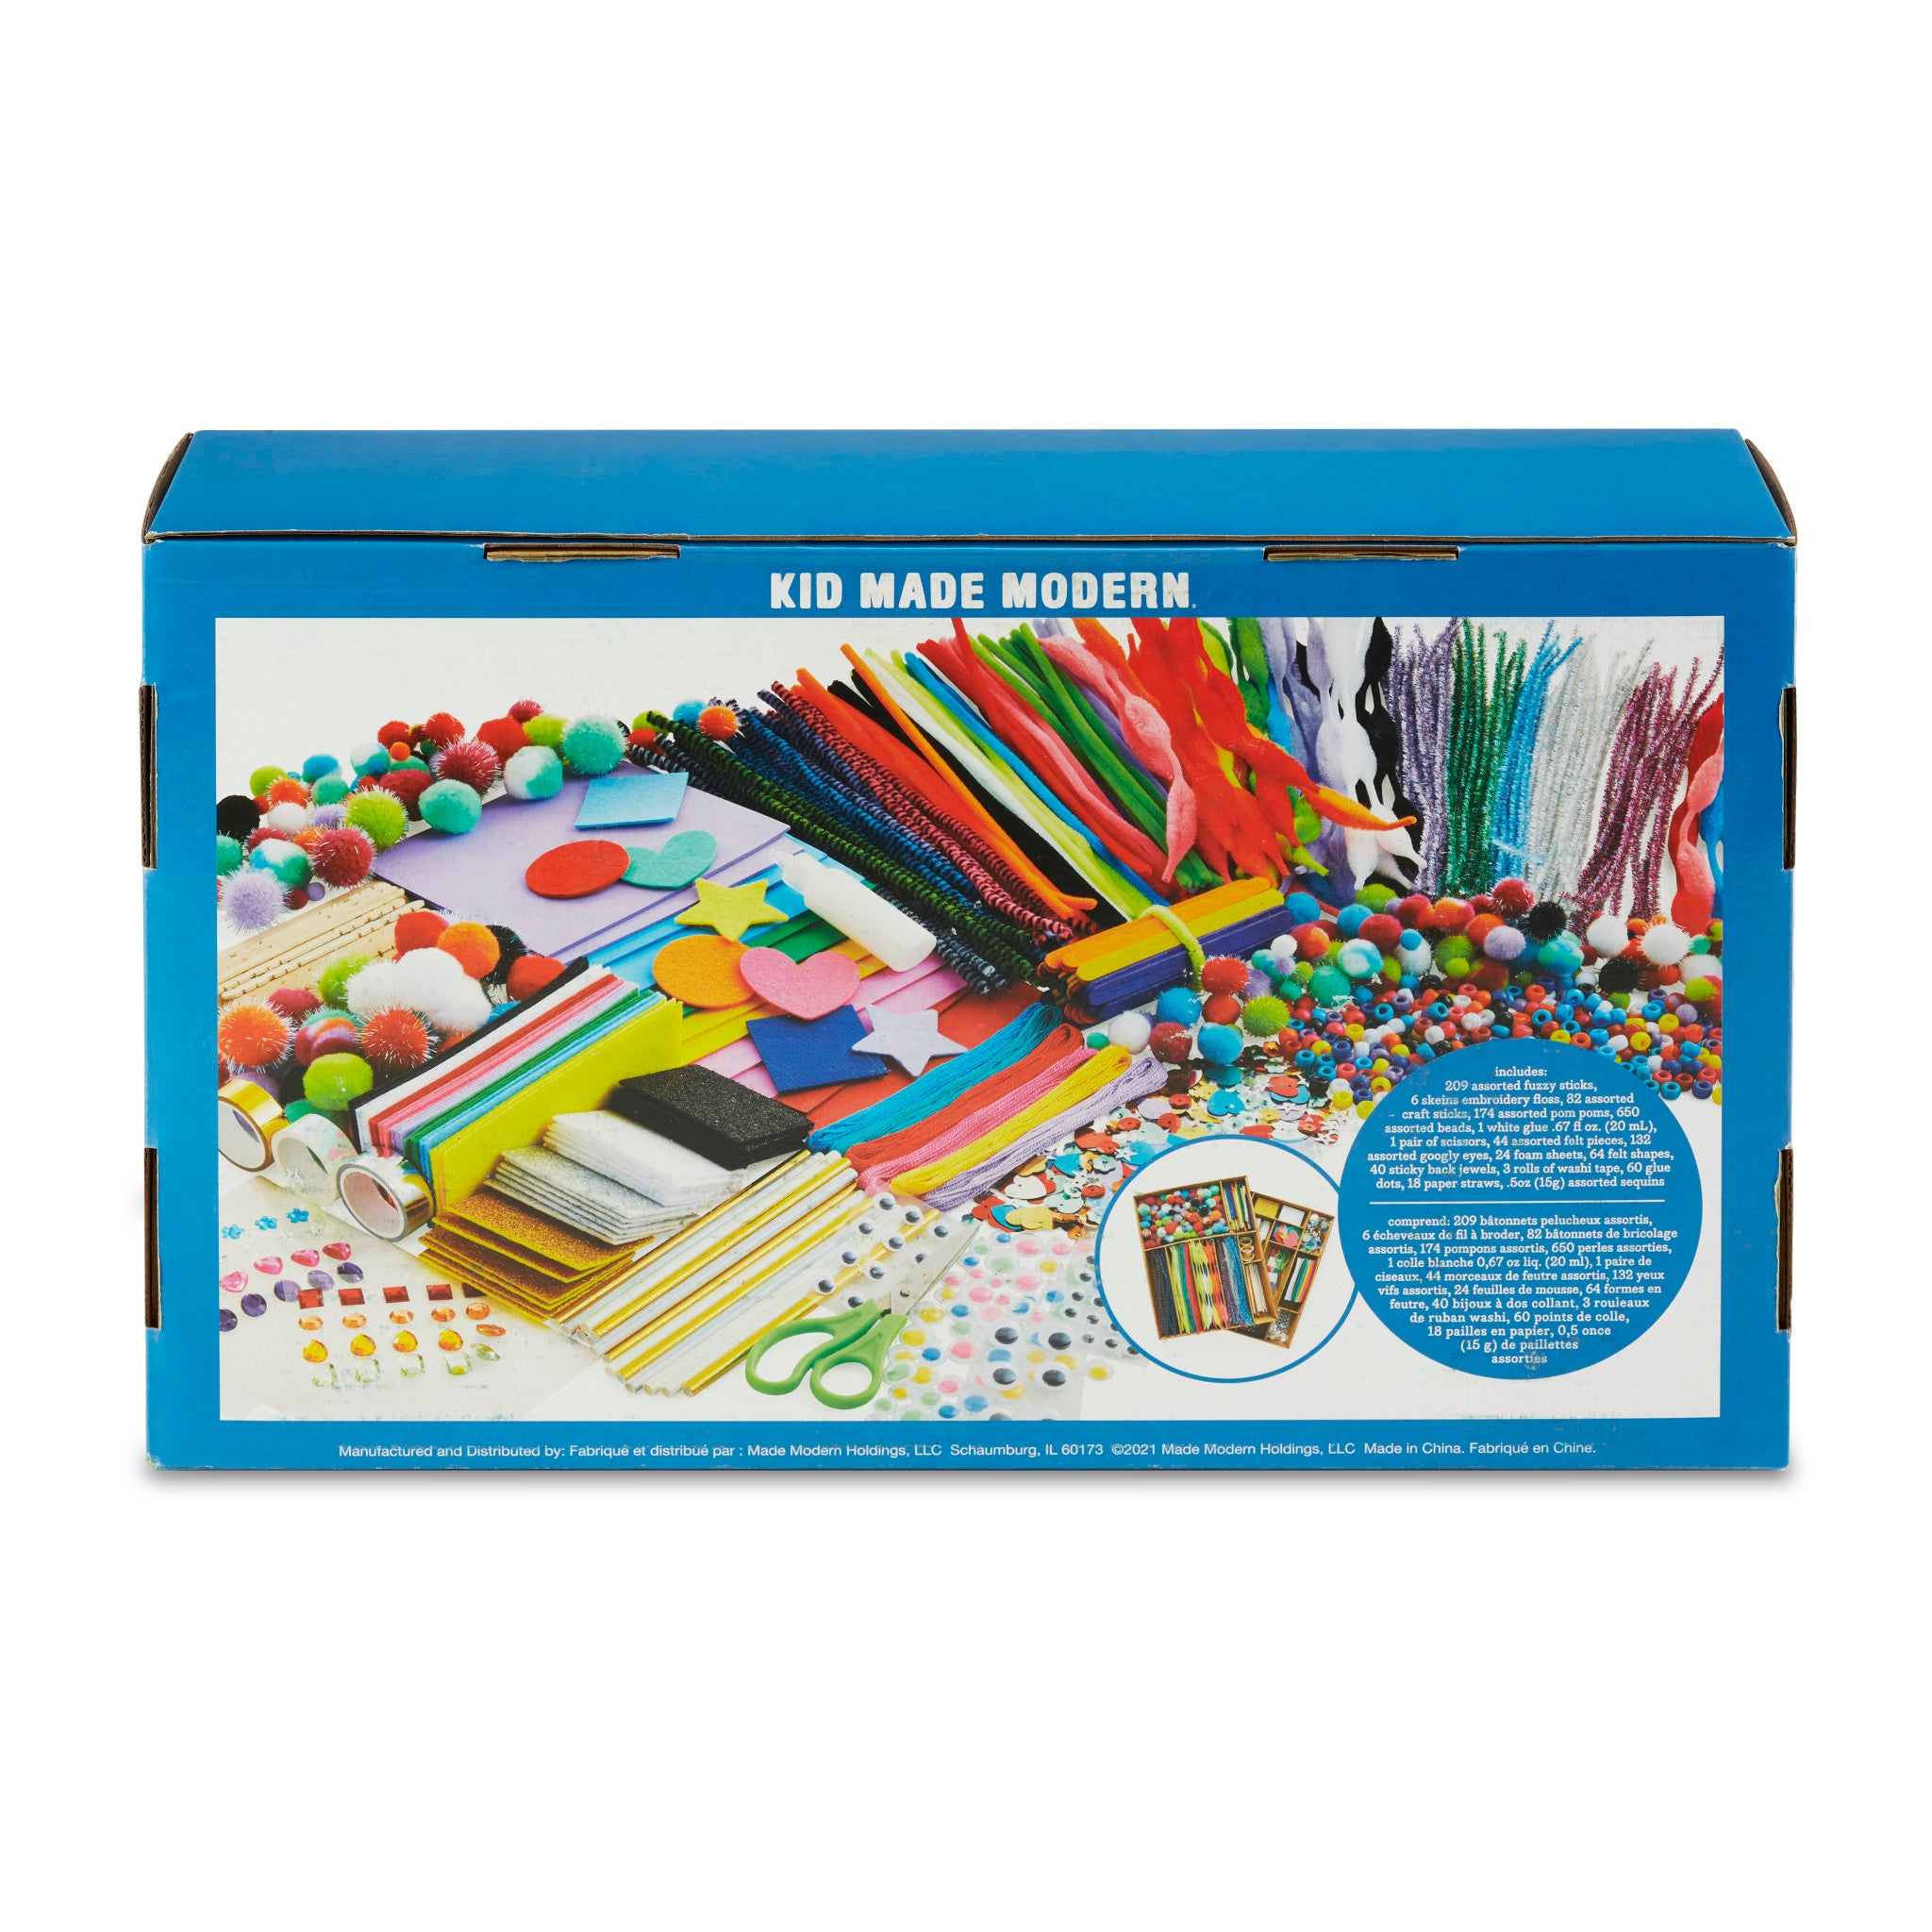 Arts And Crafts Supplies For Kids - Craft Supplies, Craft Kits